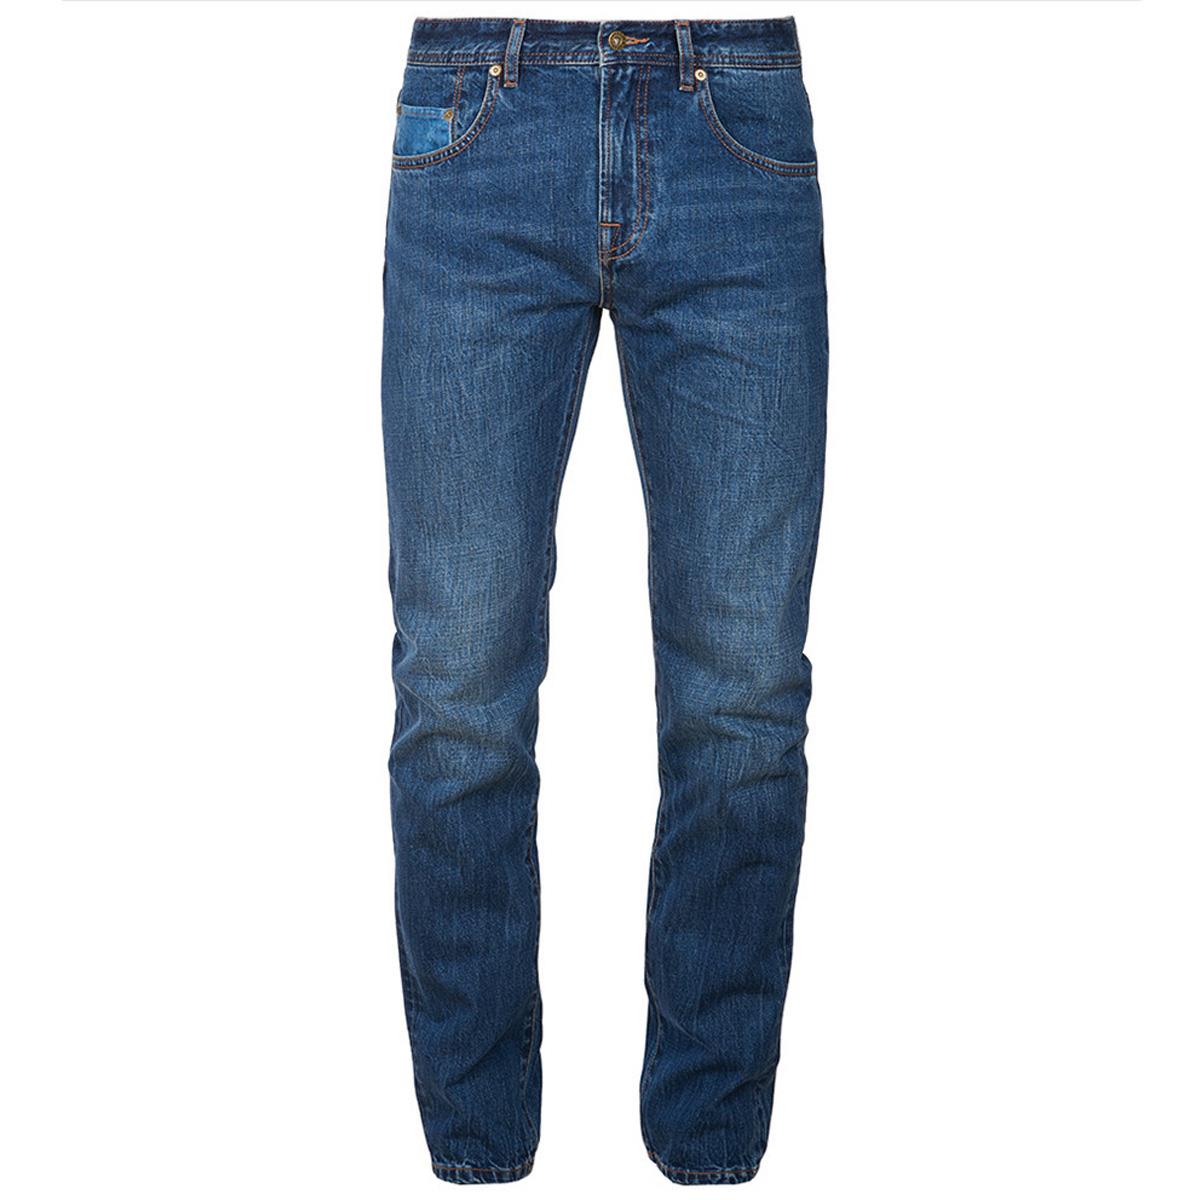 What is the PM code for barbour mens jeans?